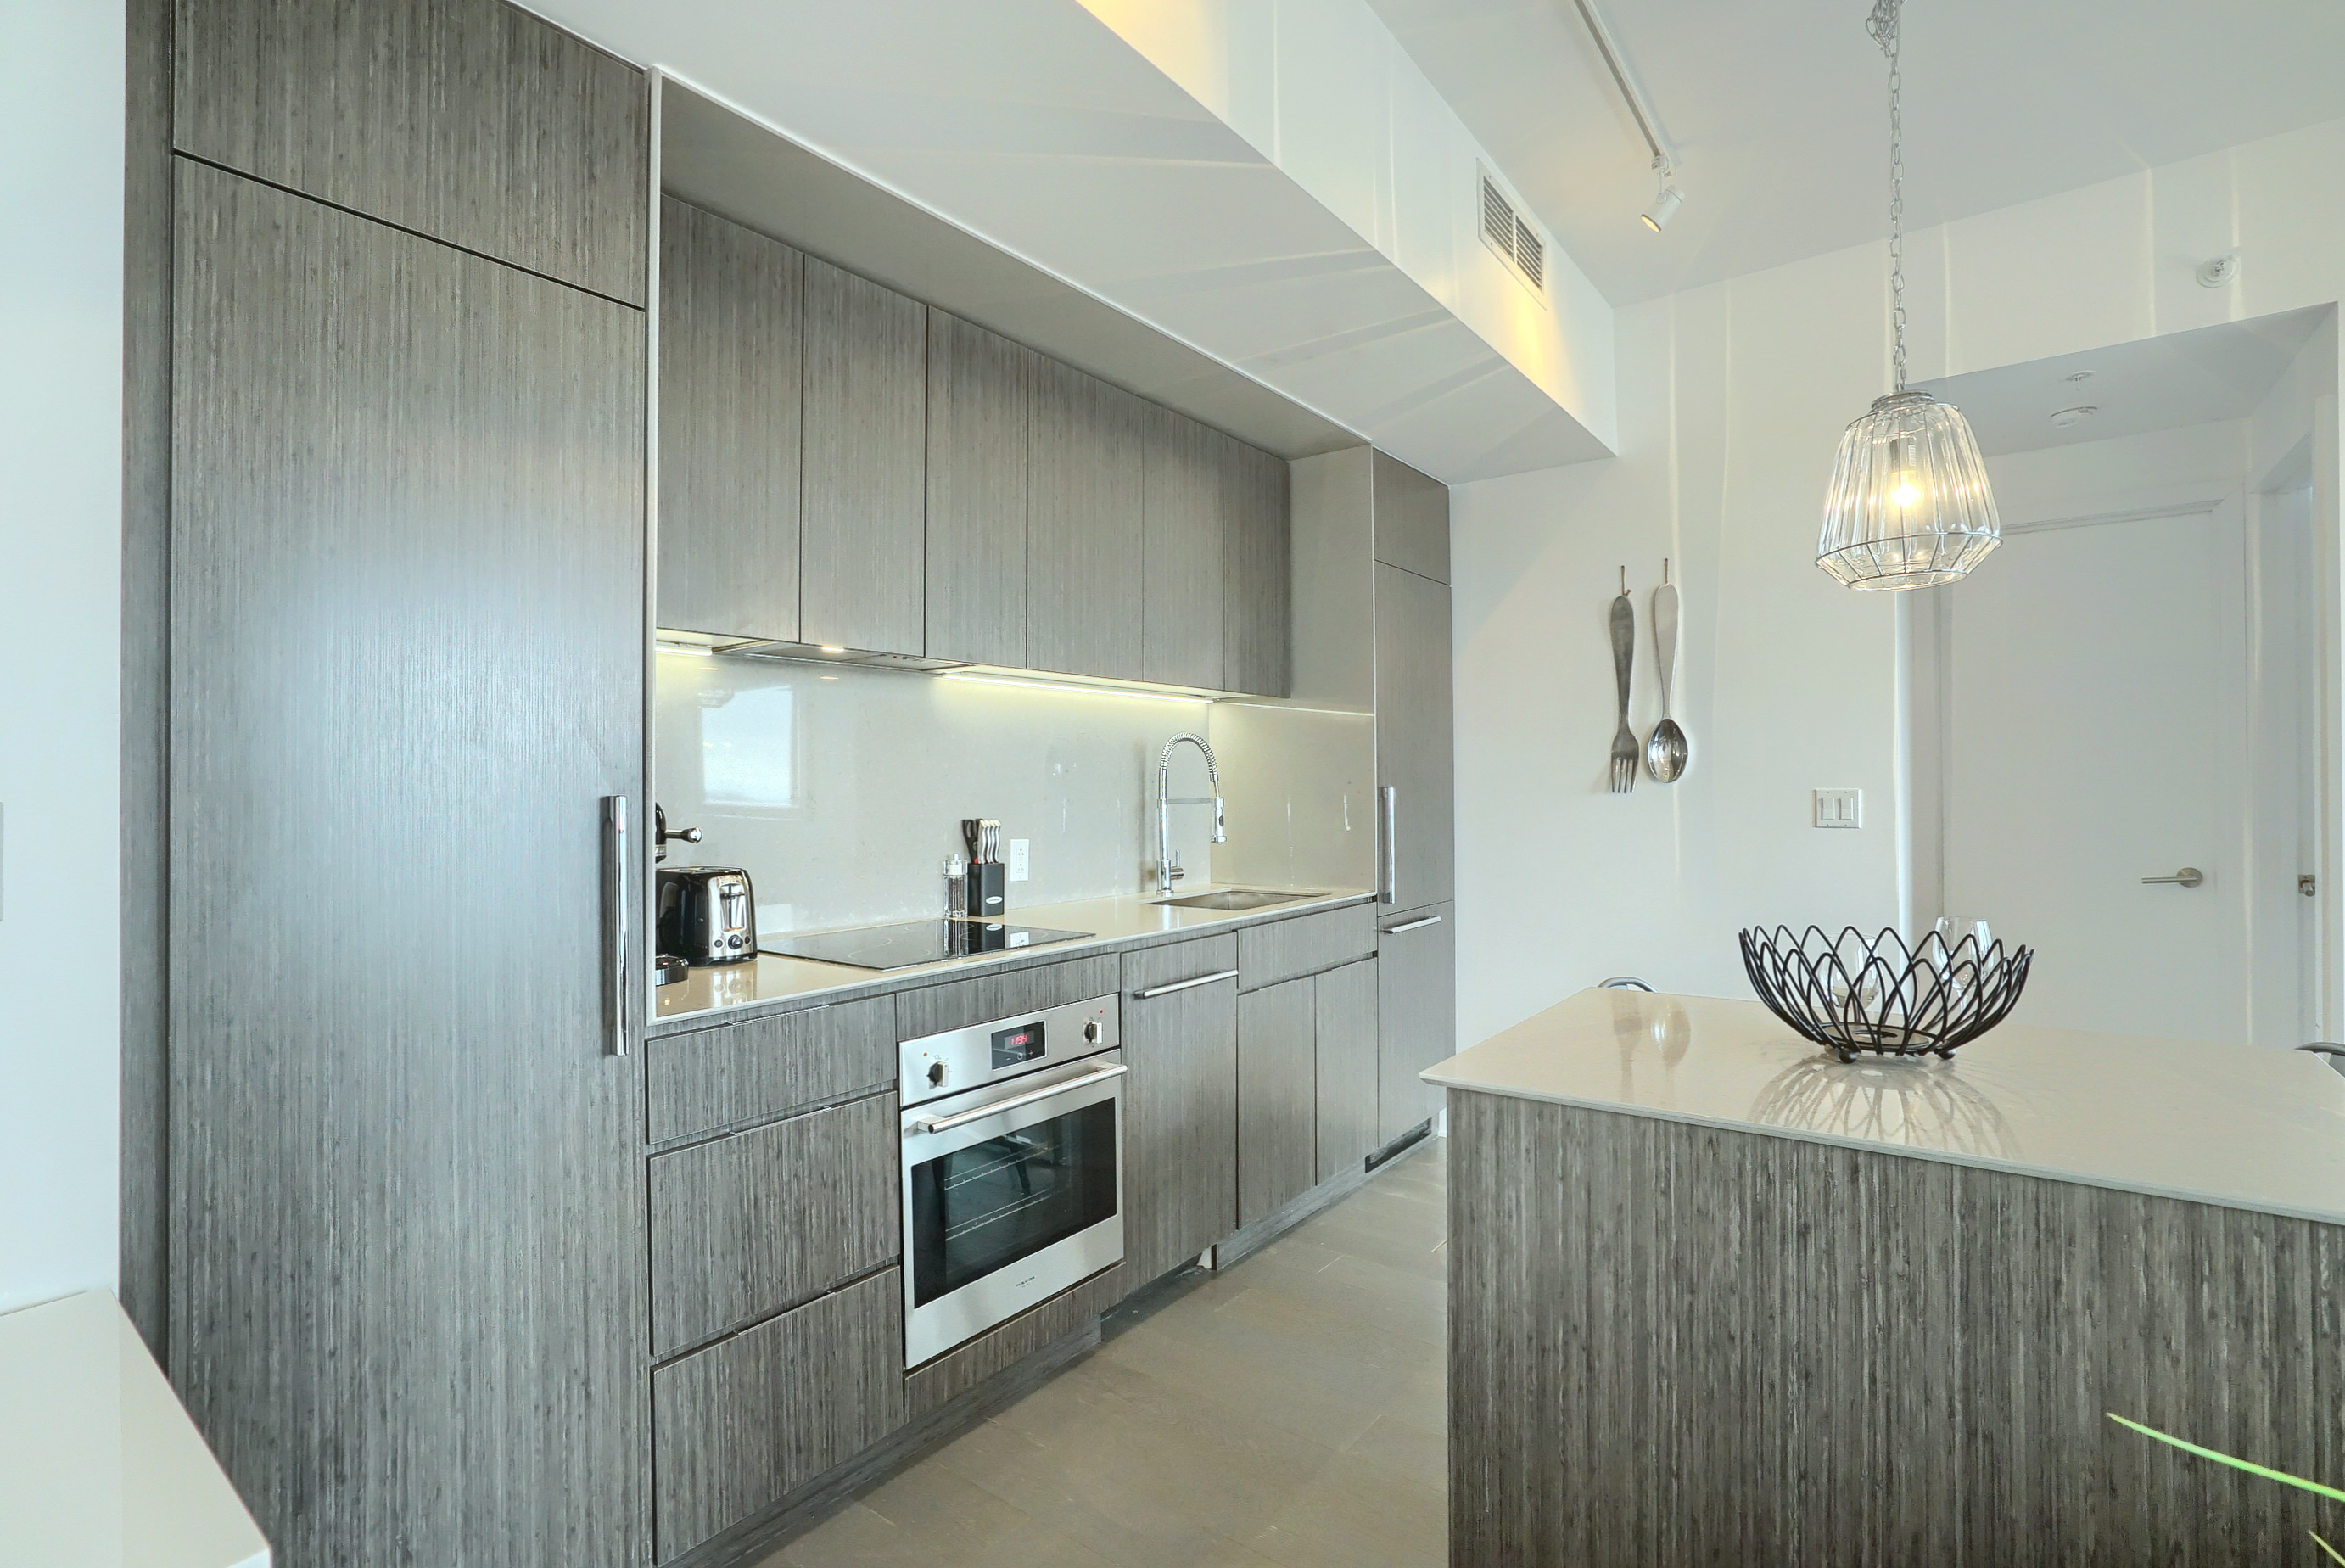 Angled view into the modern kitchen of this furnished rental in montreal. Darker gray cabinets with inset pantry and refrigerator. Generous counter space, flat top stove and inset oven. Light and spacious, ultra modern kitchen 